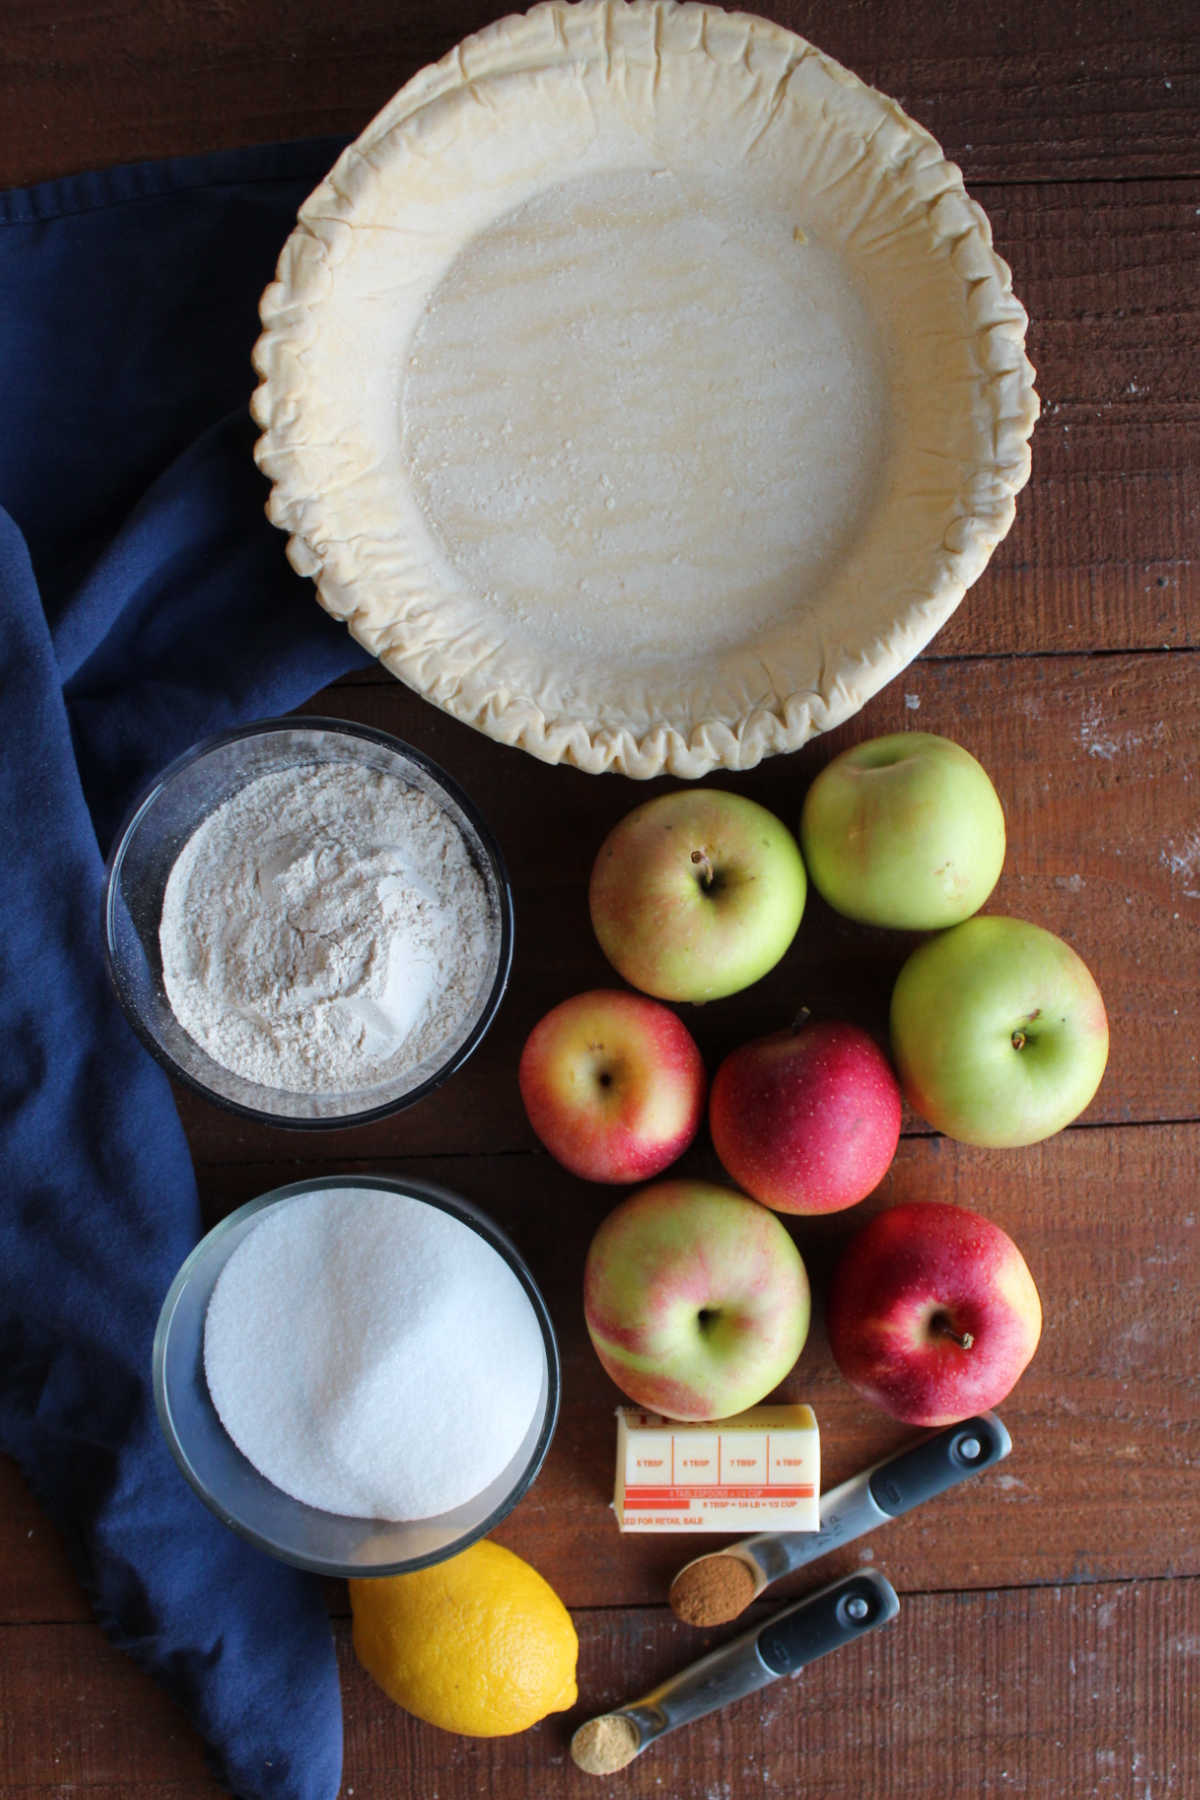 Ingredients including pie crust, apples, butter, cinnamon, ginger, lemon, sugar, and flour ready to be made into a Dutch apple pie.